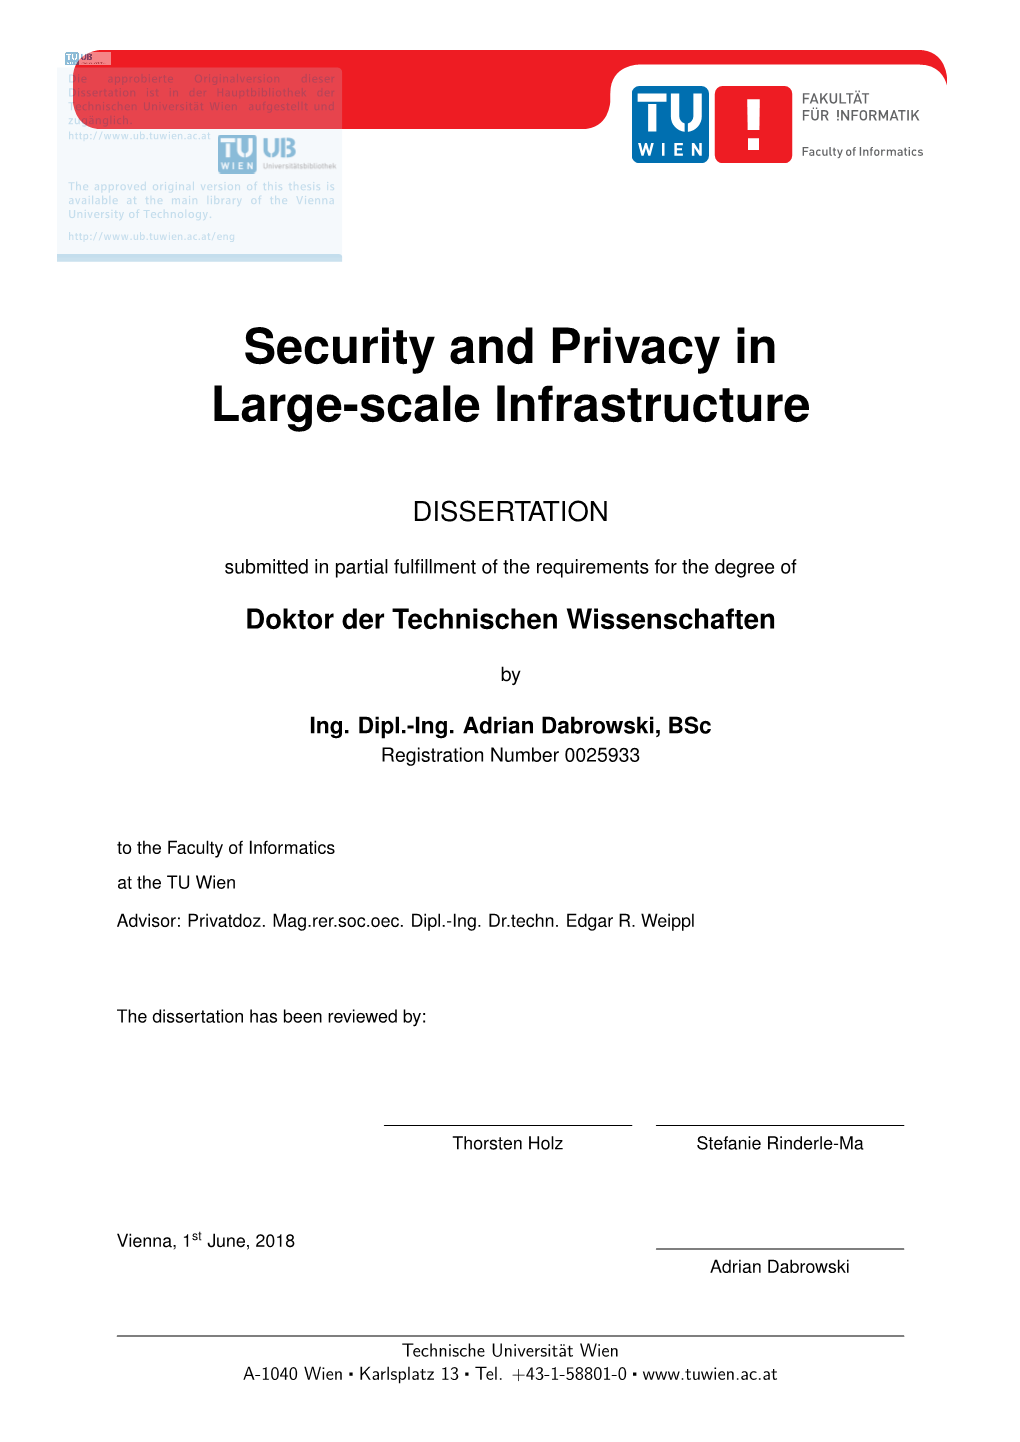 Security and Privacy in Large-Scale Infrastructure